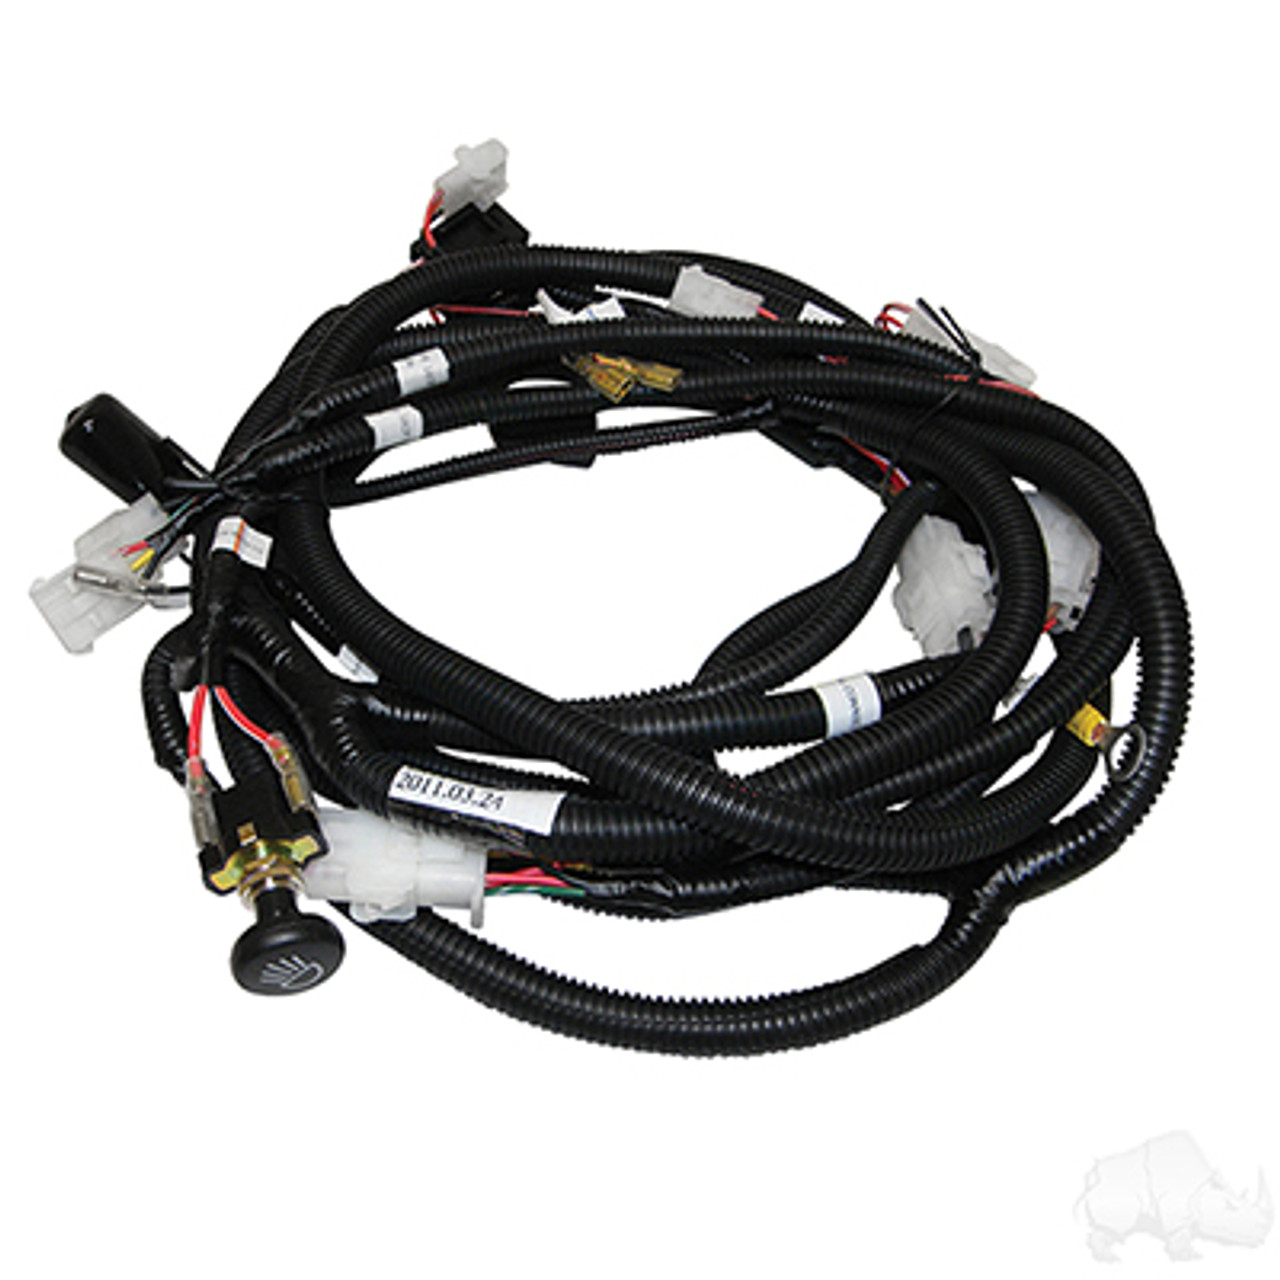 Plug & Play Wire Harness for E-Z-Go RXV 2008-Up Golf Carts, LGT-699